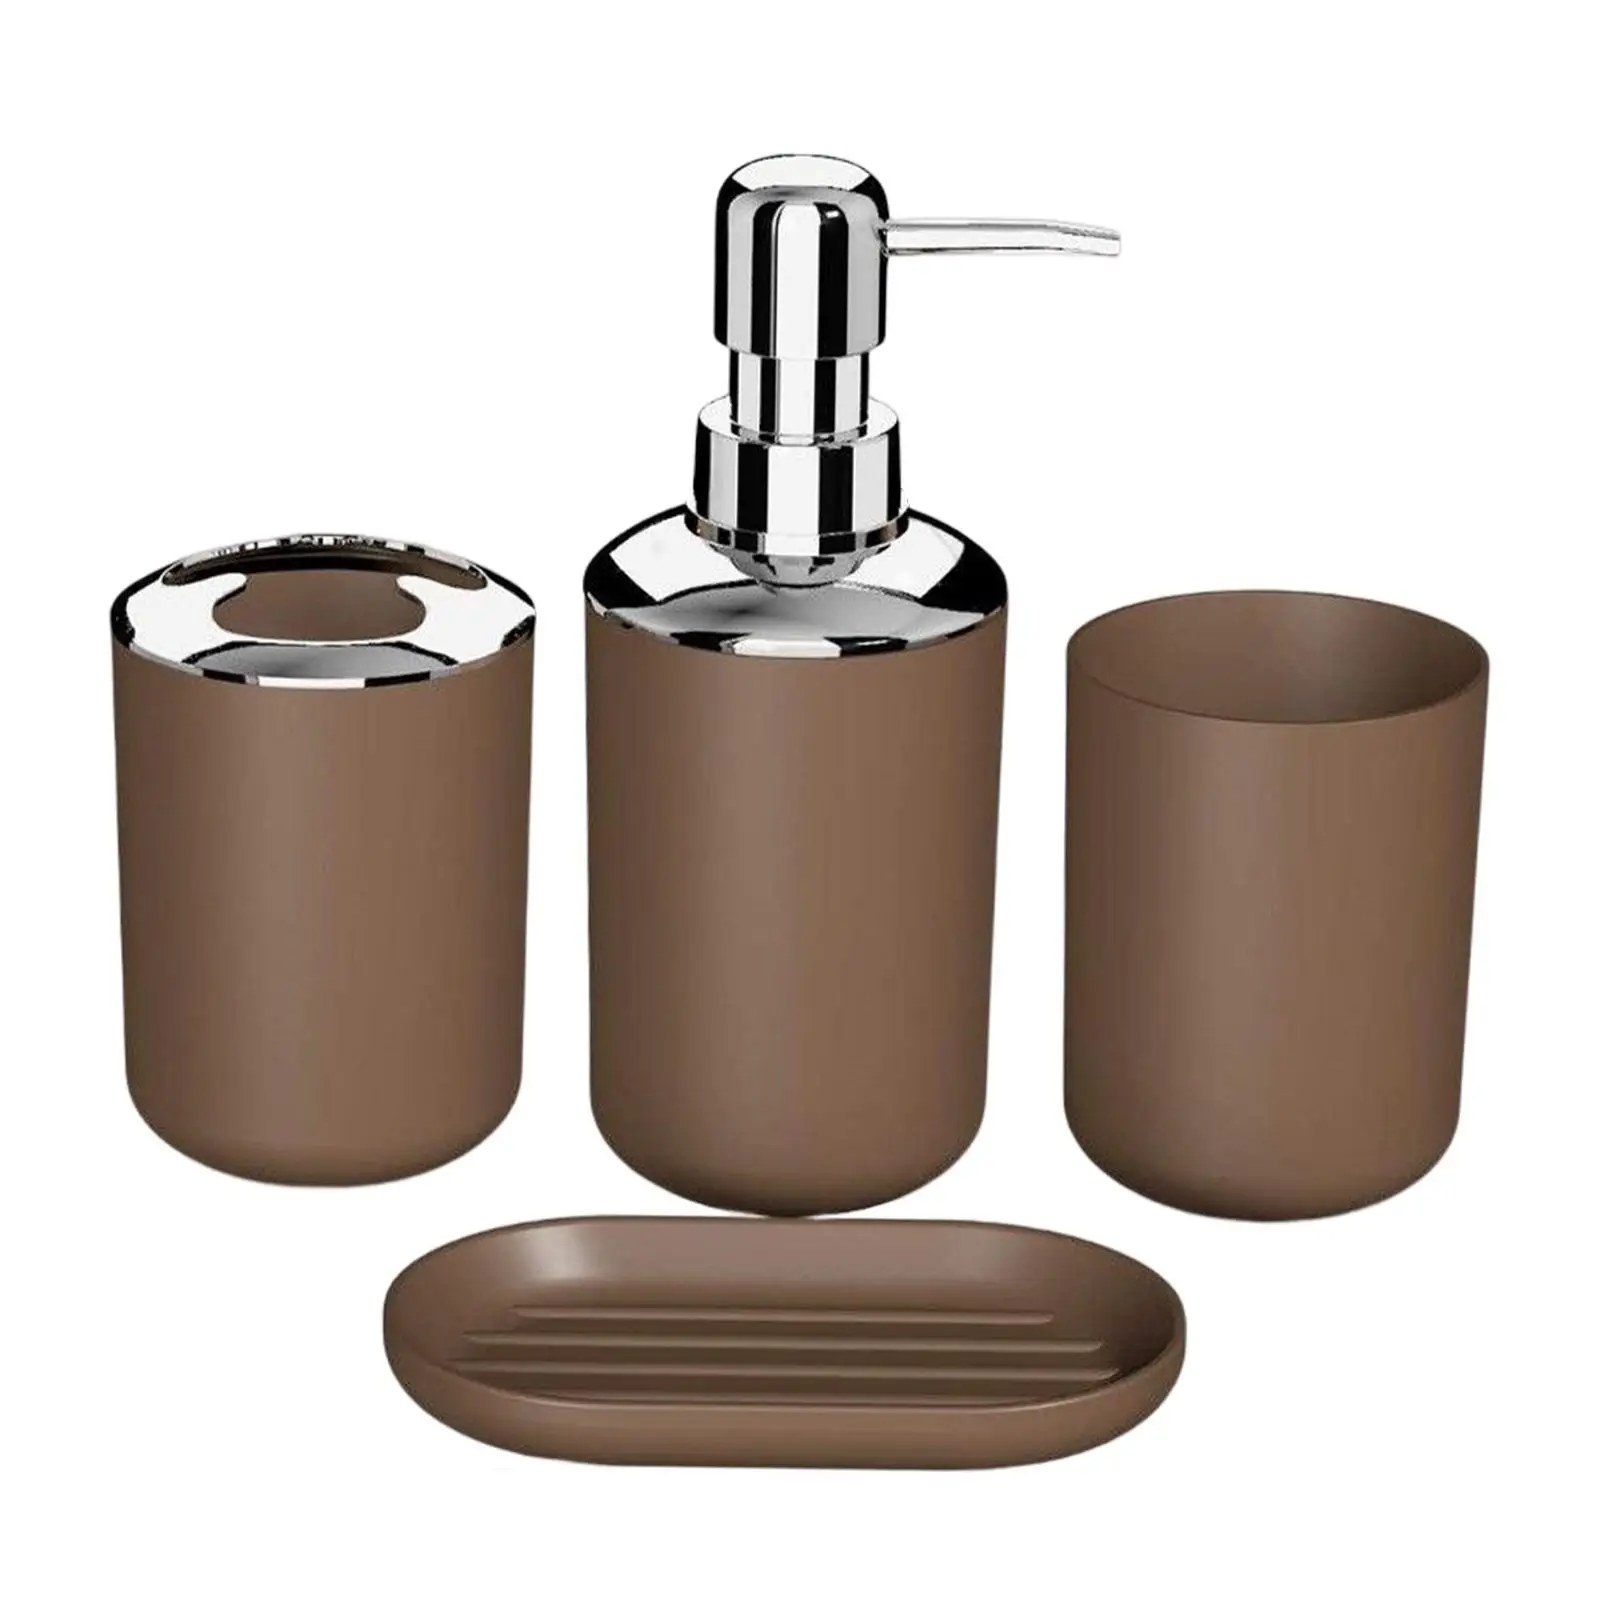 4 Pieces Bathroom Accessories Set & Soap Dish & Tumbler Vanity Organizer & Toothbrush Holder for Office Buildings Apartment